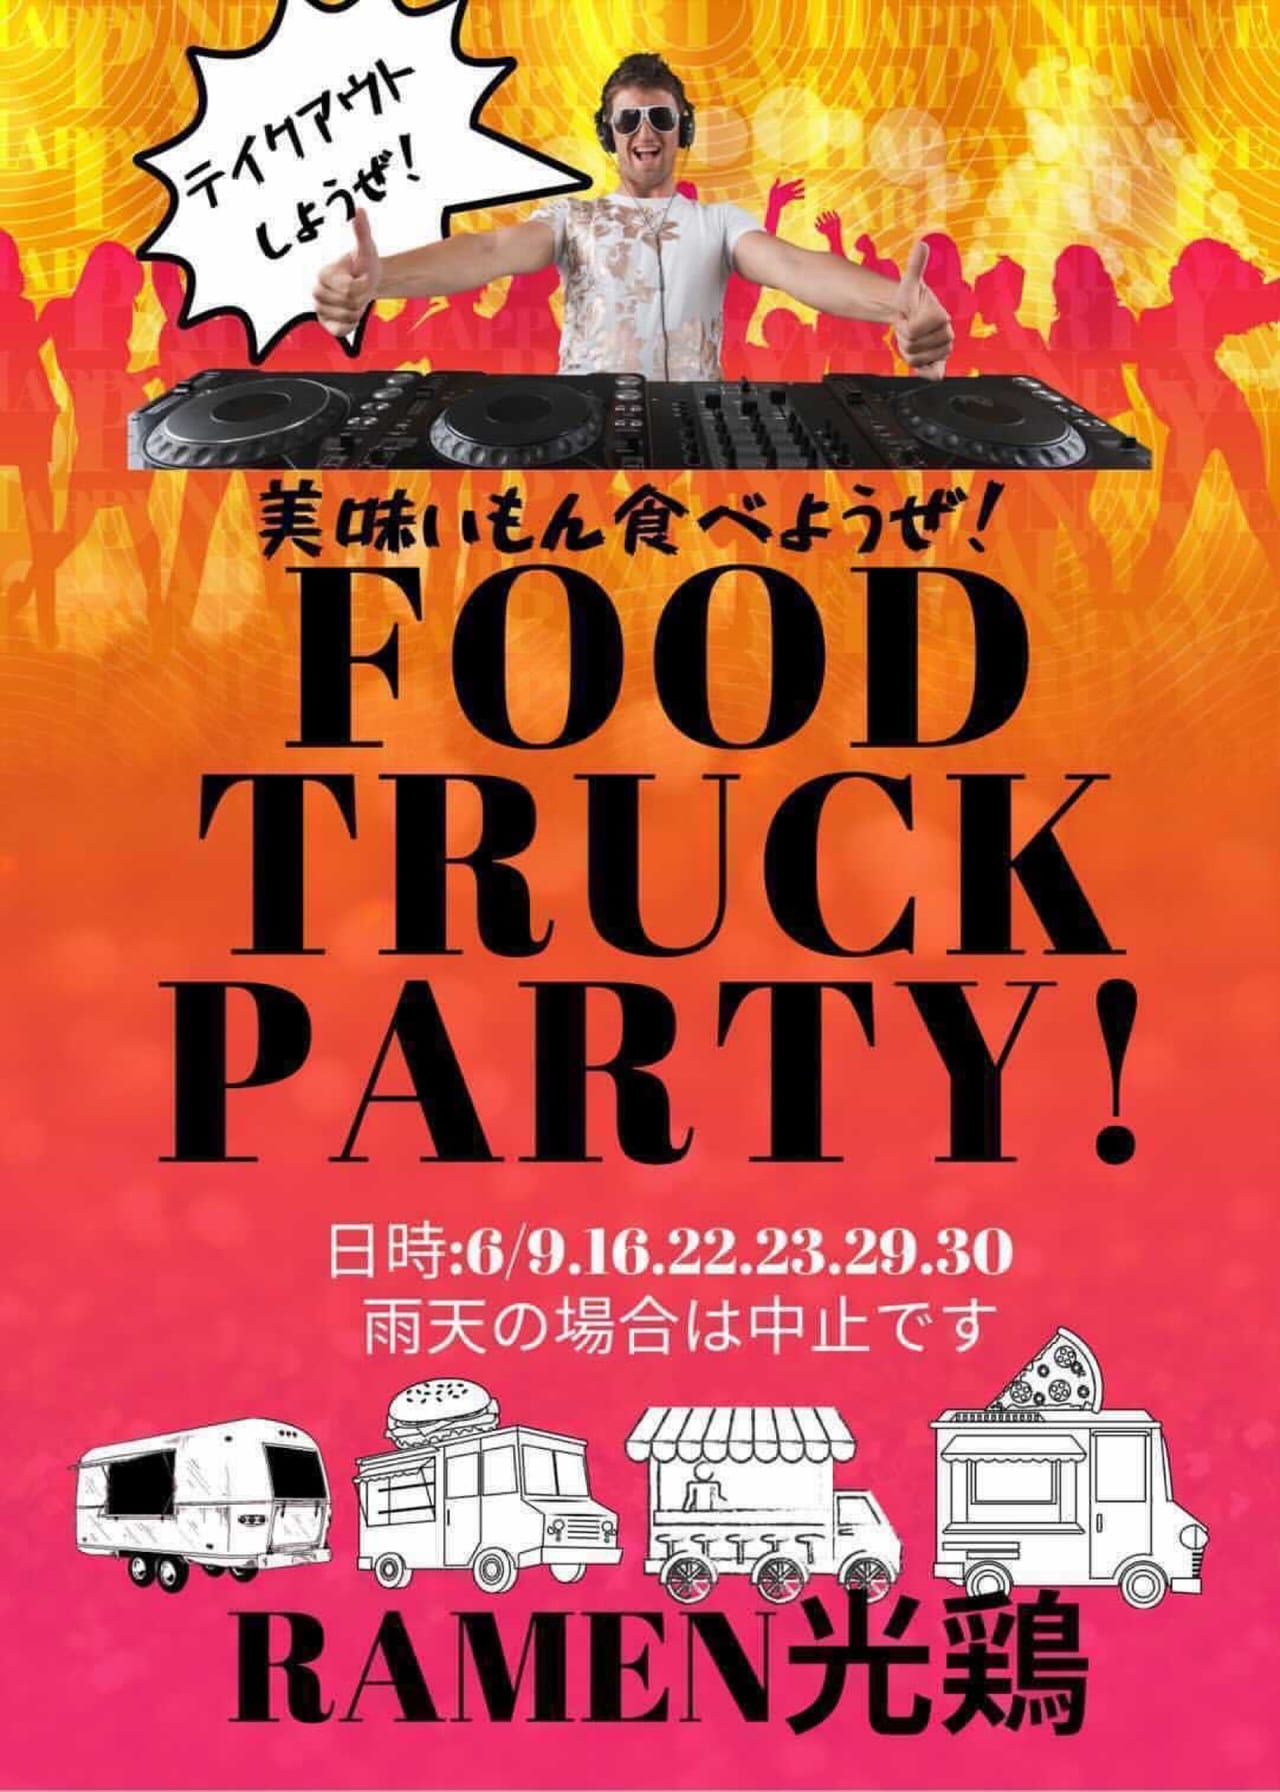 FOOD TRUCK PARTY 光鶏